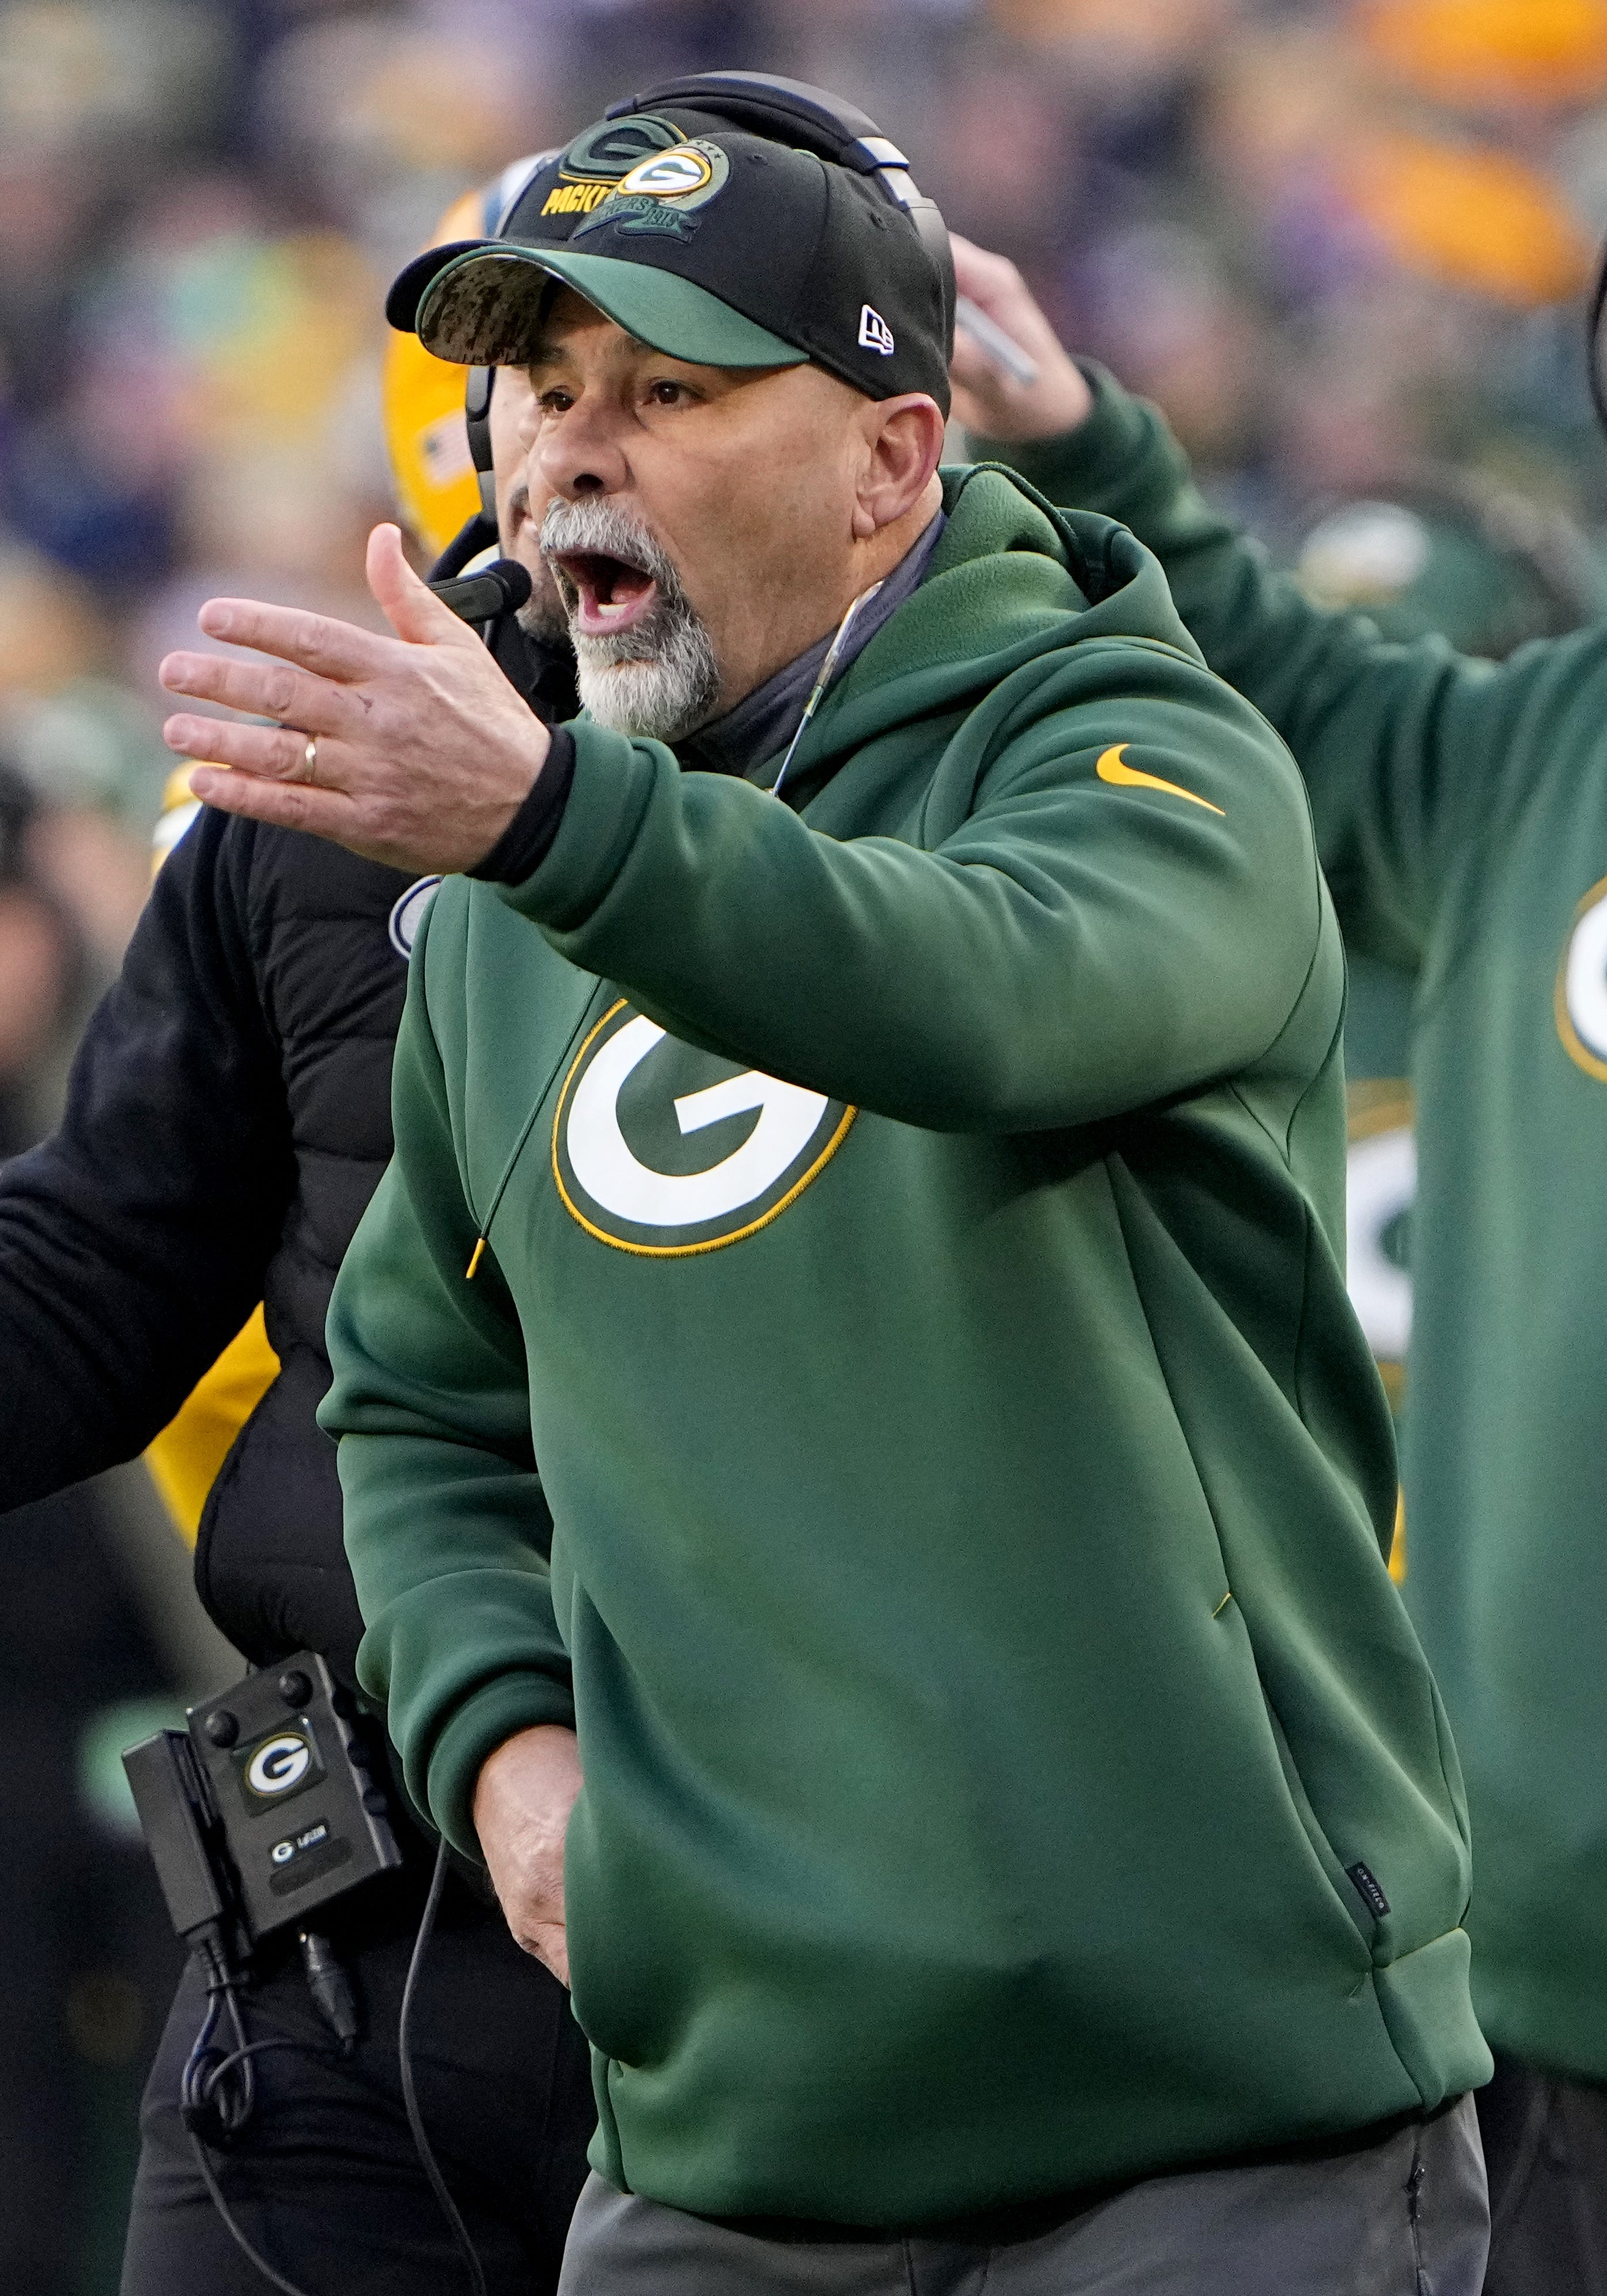 Aaron Rodgers says Rich Bisaccia should get NFL head coaching job